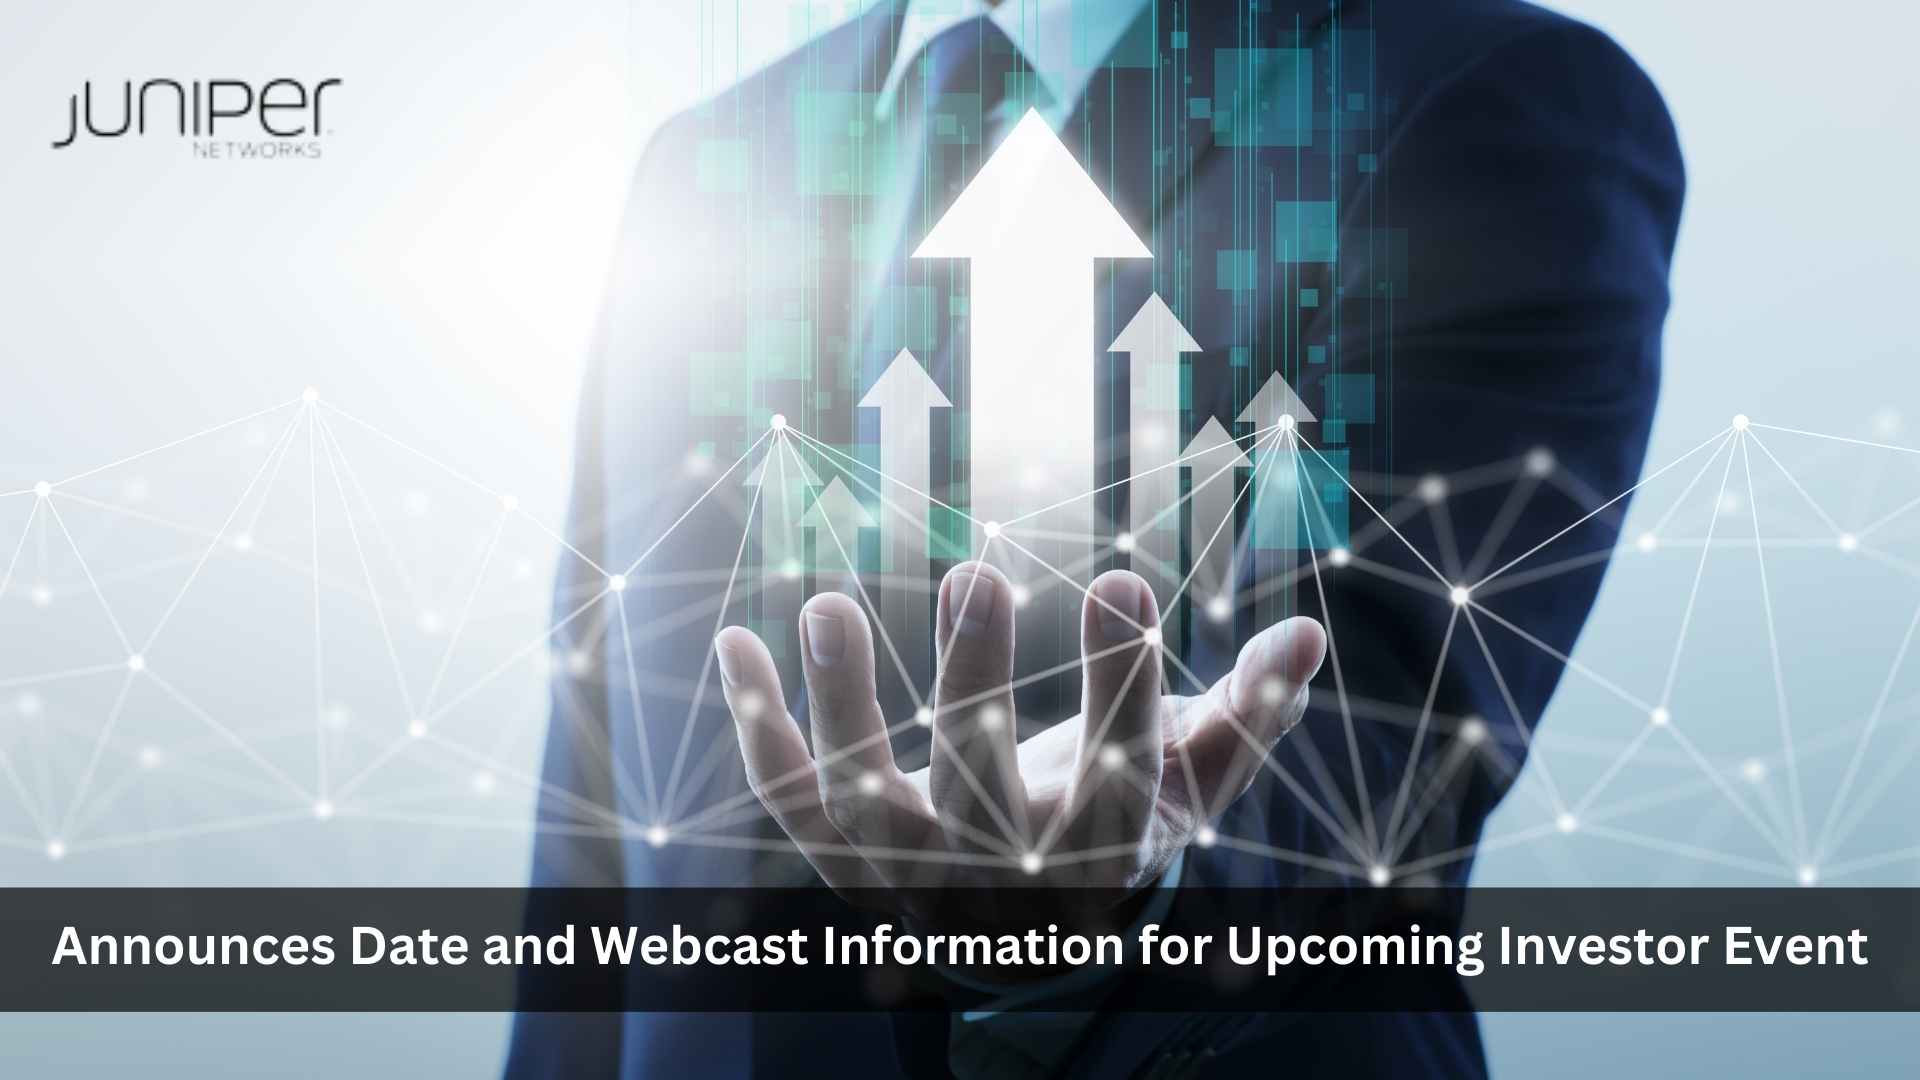 Juniper Networks Announces Date and Webcast Information for Upcoming Investor Event